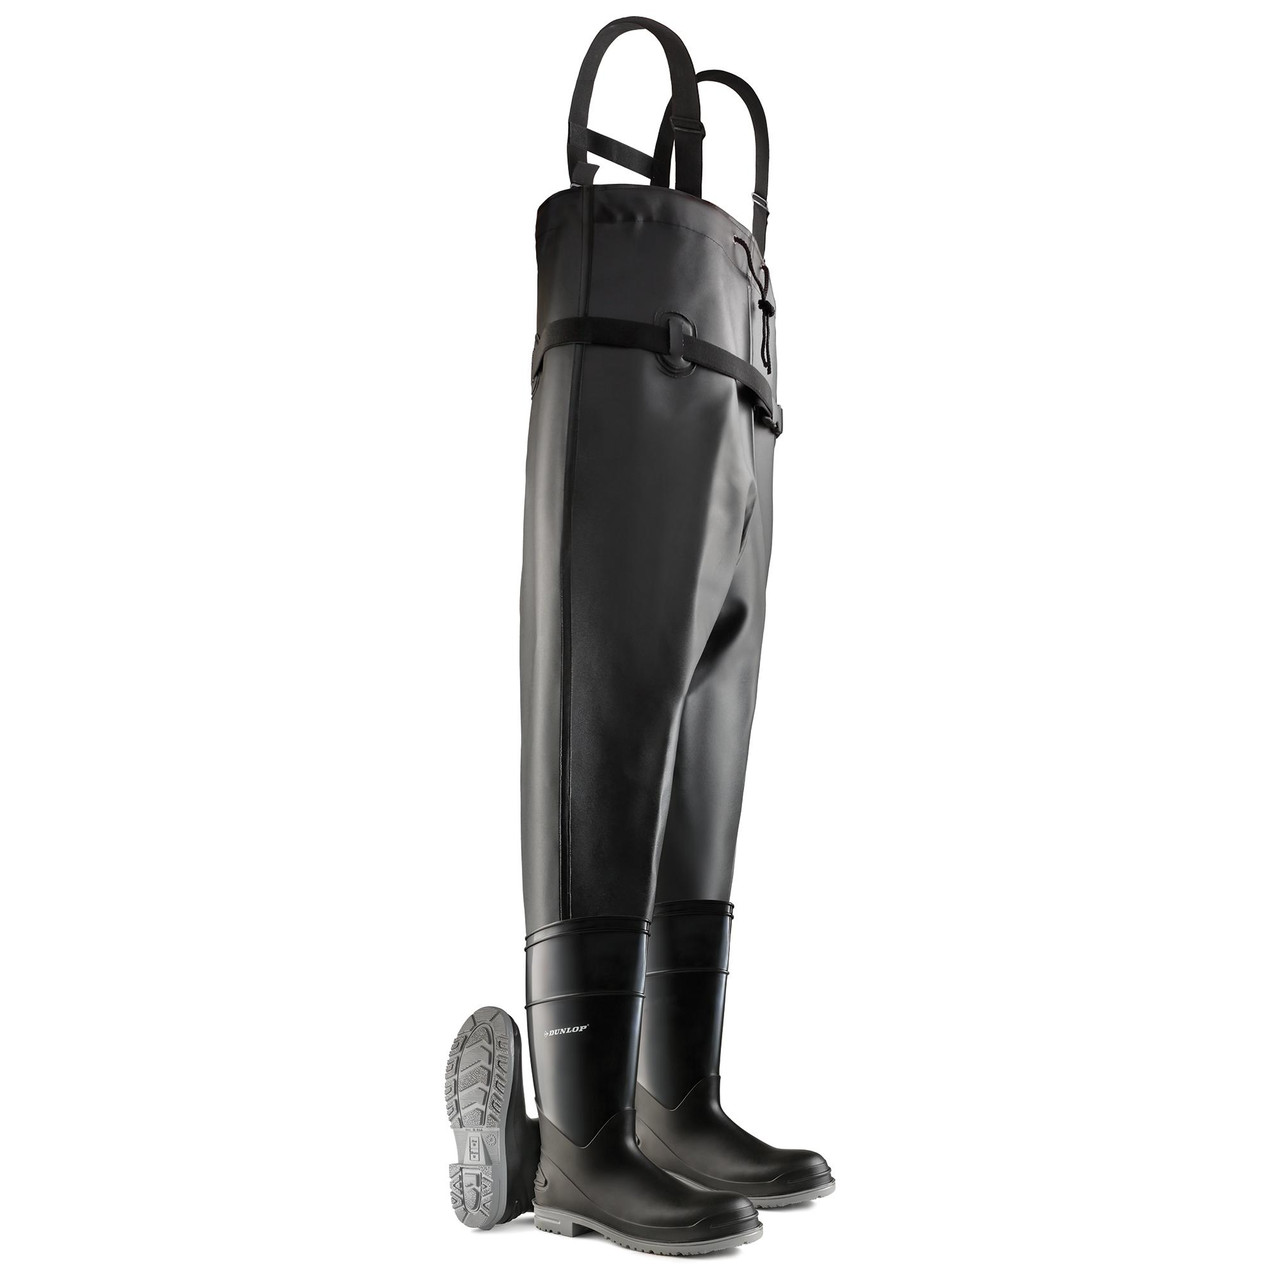 Dunlop Onguard Chest Waders Steel Toe with Outsole | - Durawear.com